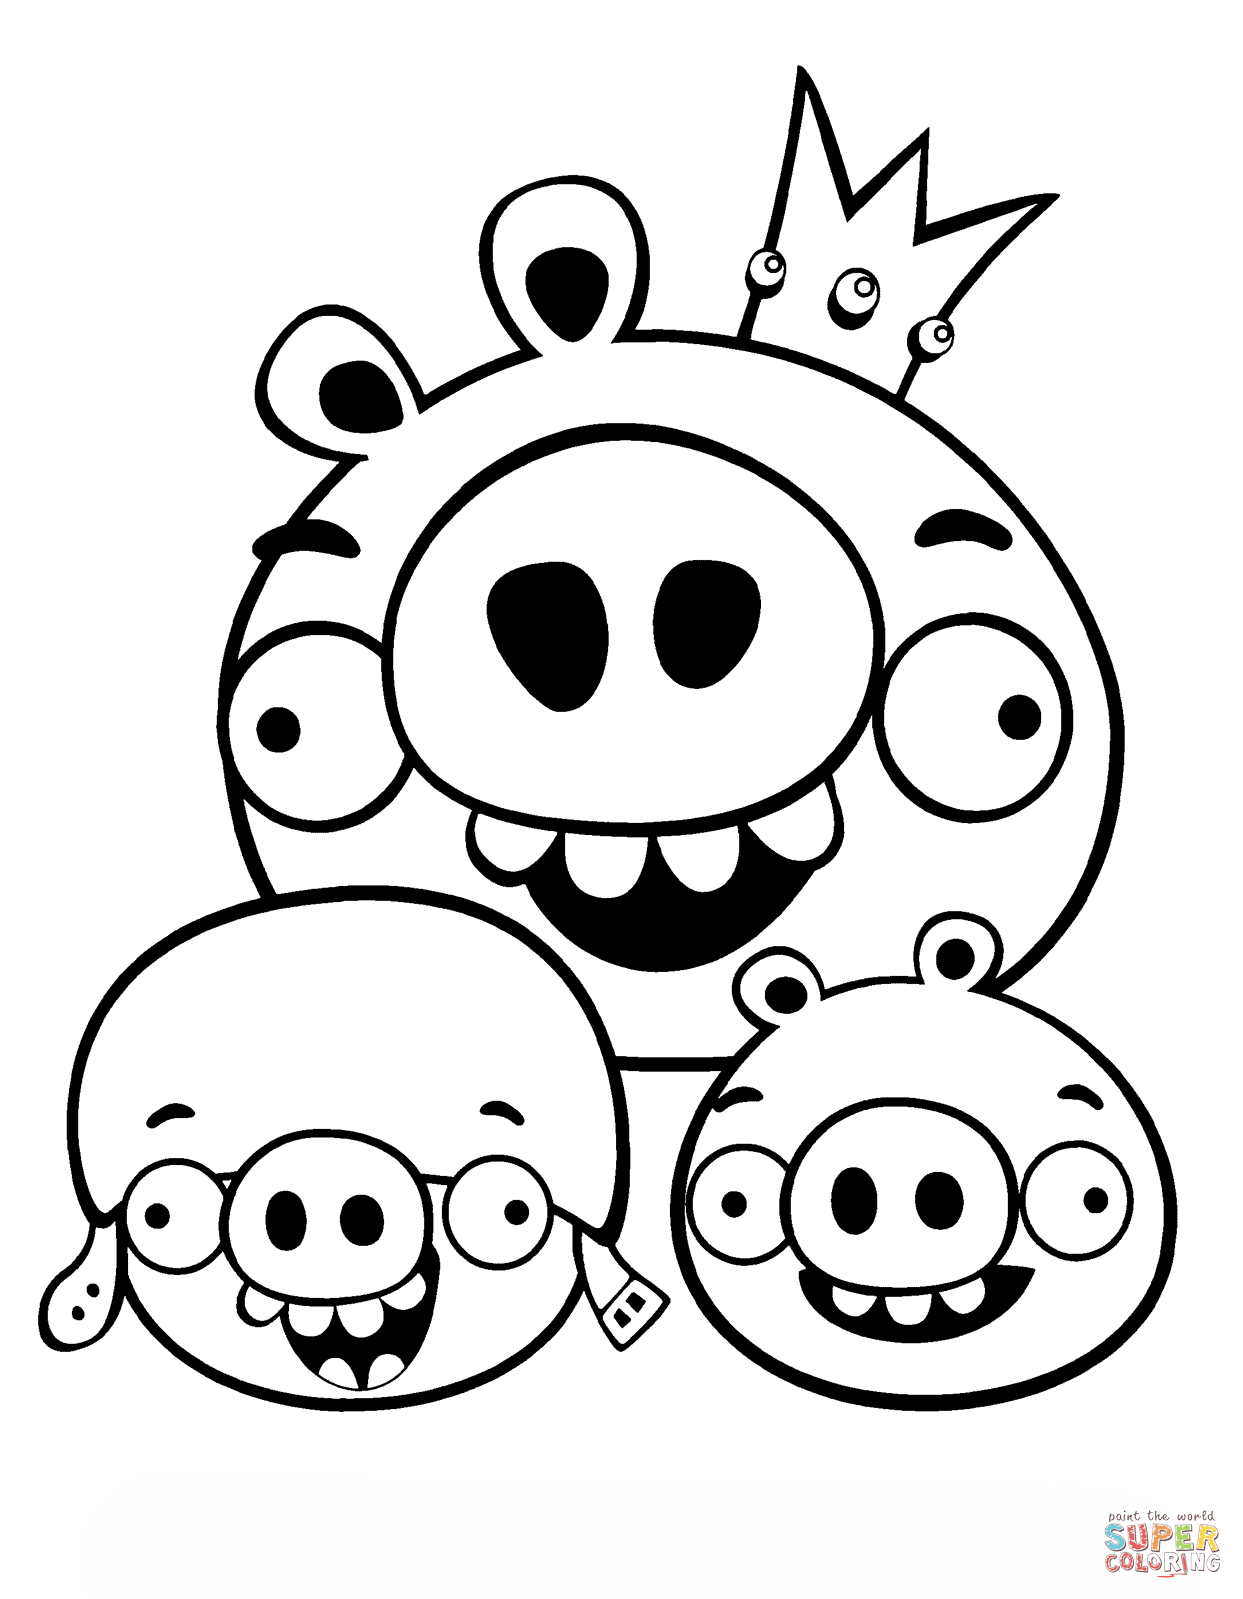 King pig corporal and minion coloring page free printable coloring pages